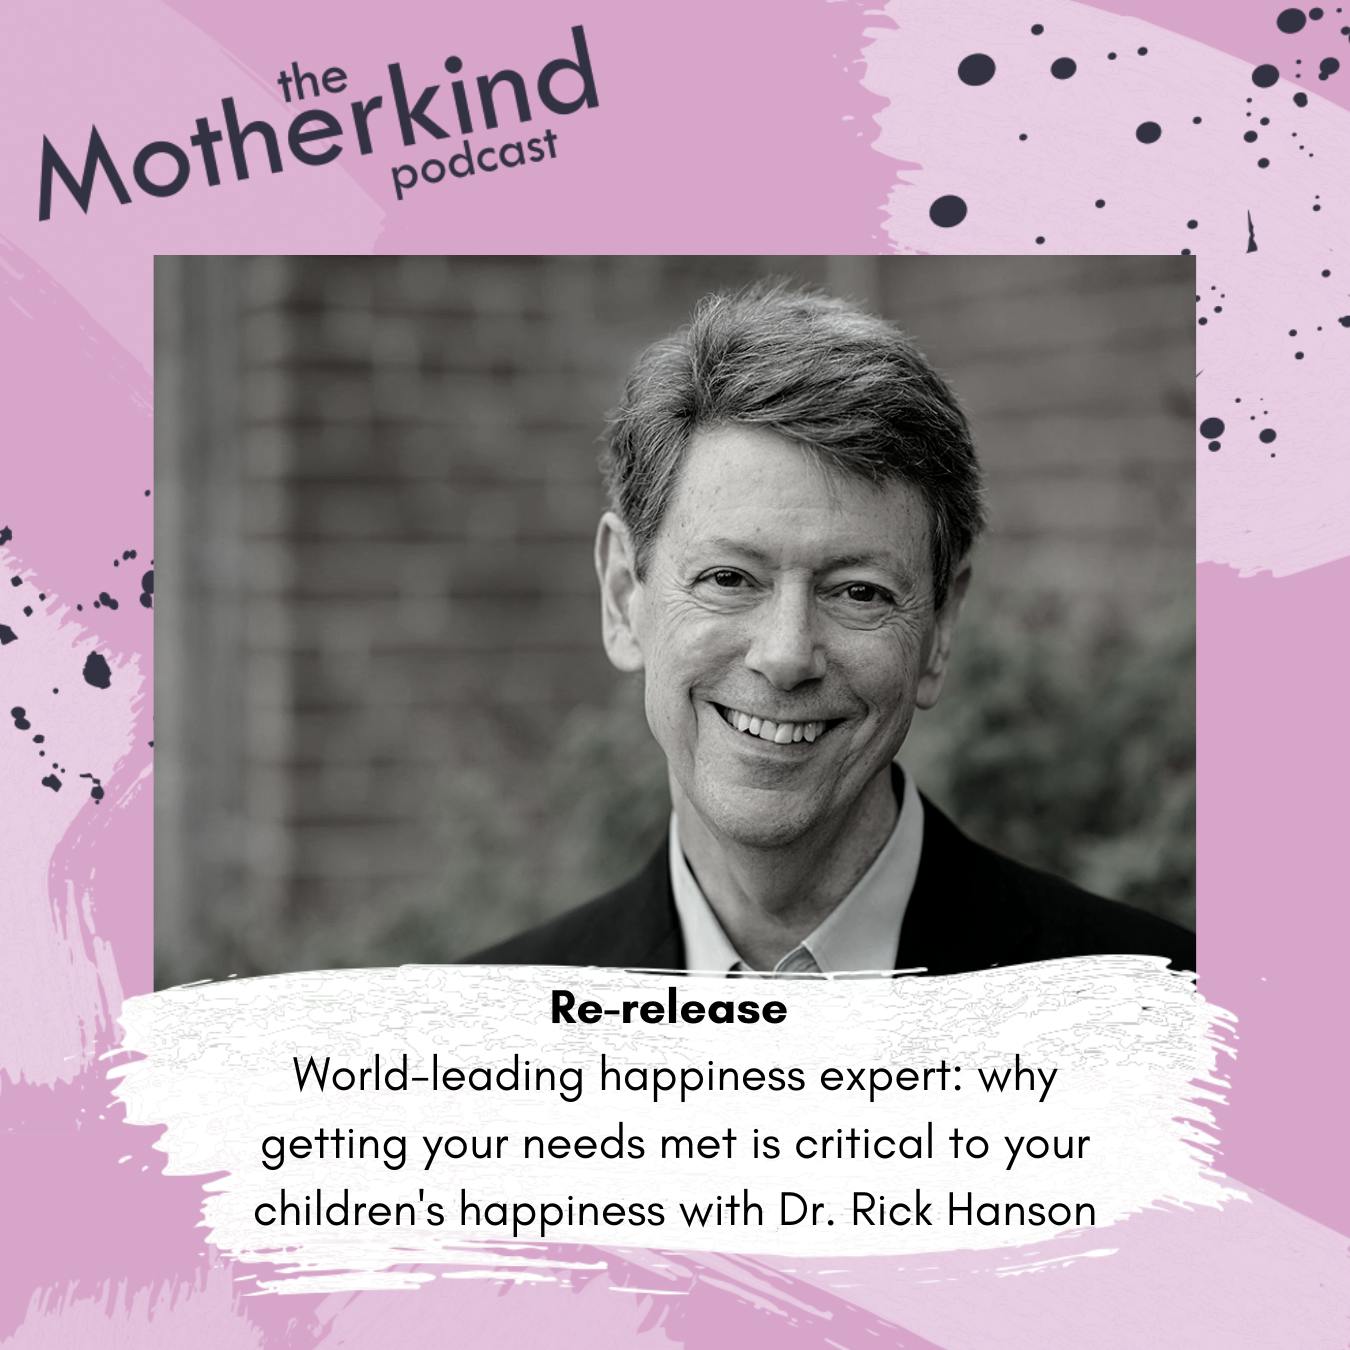 Re-release | World-leading happiness expert: why getting your needs met is critical to your children’s happiness with Dr. Rick Hanson